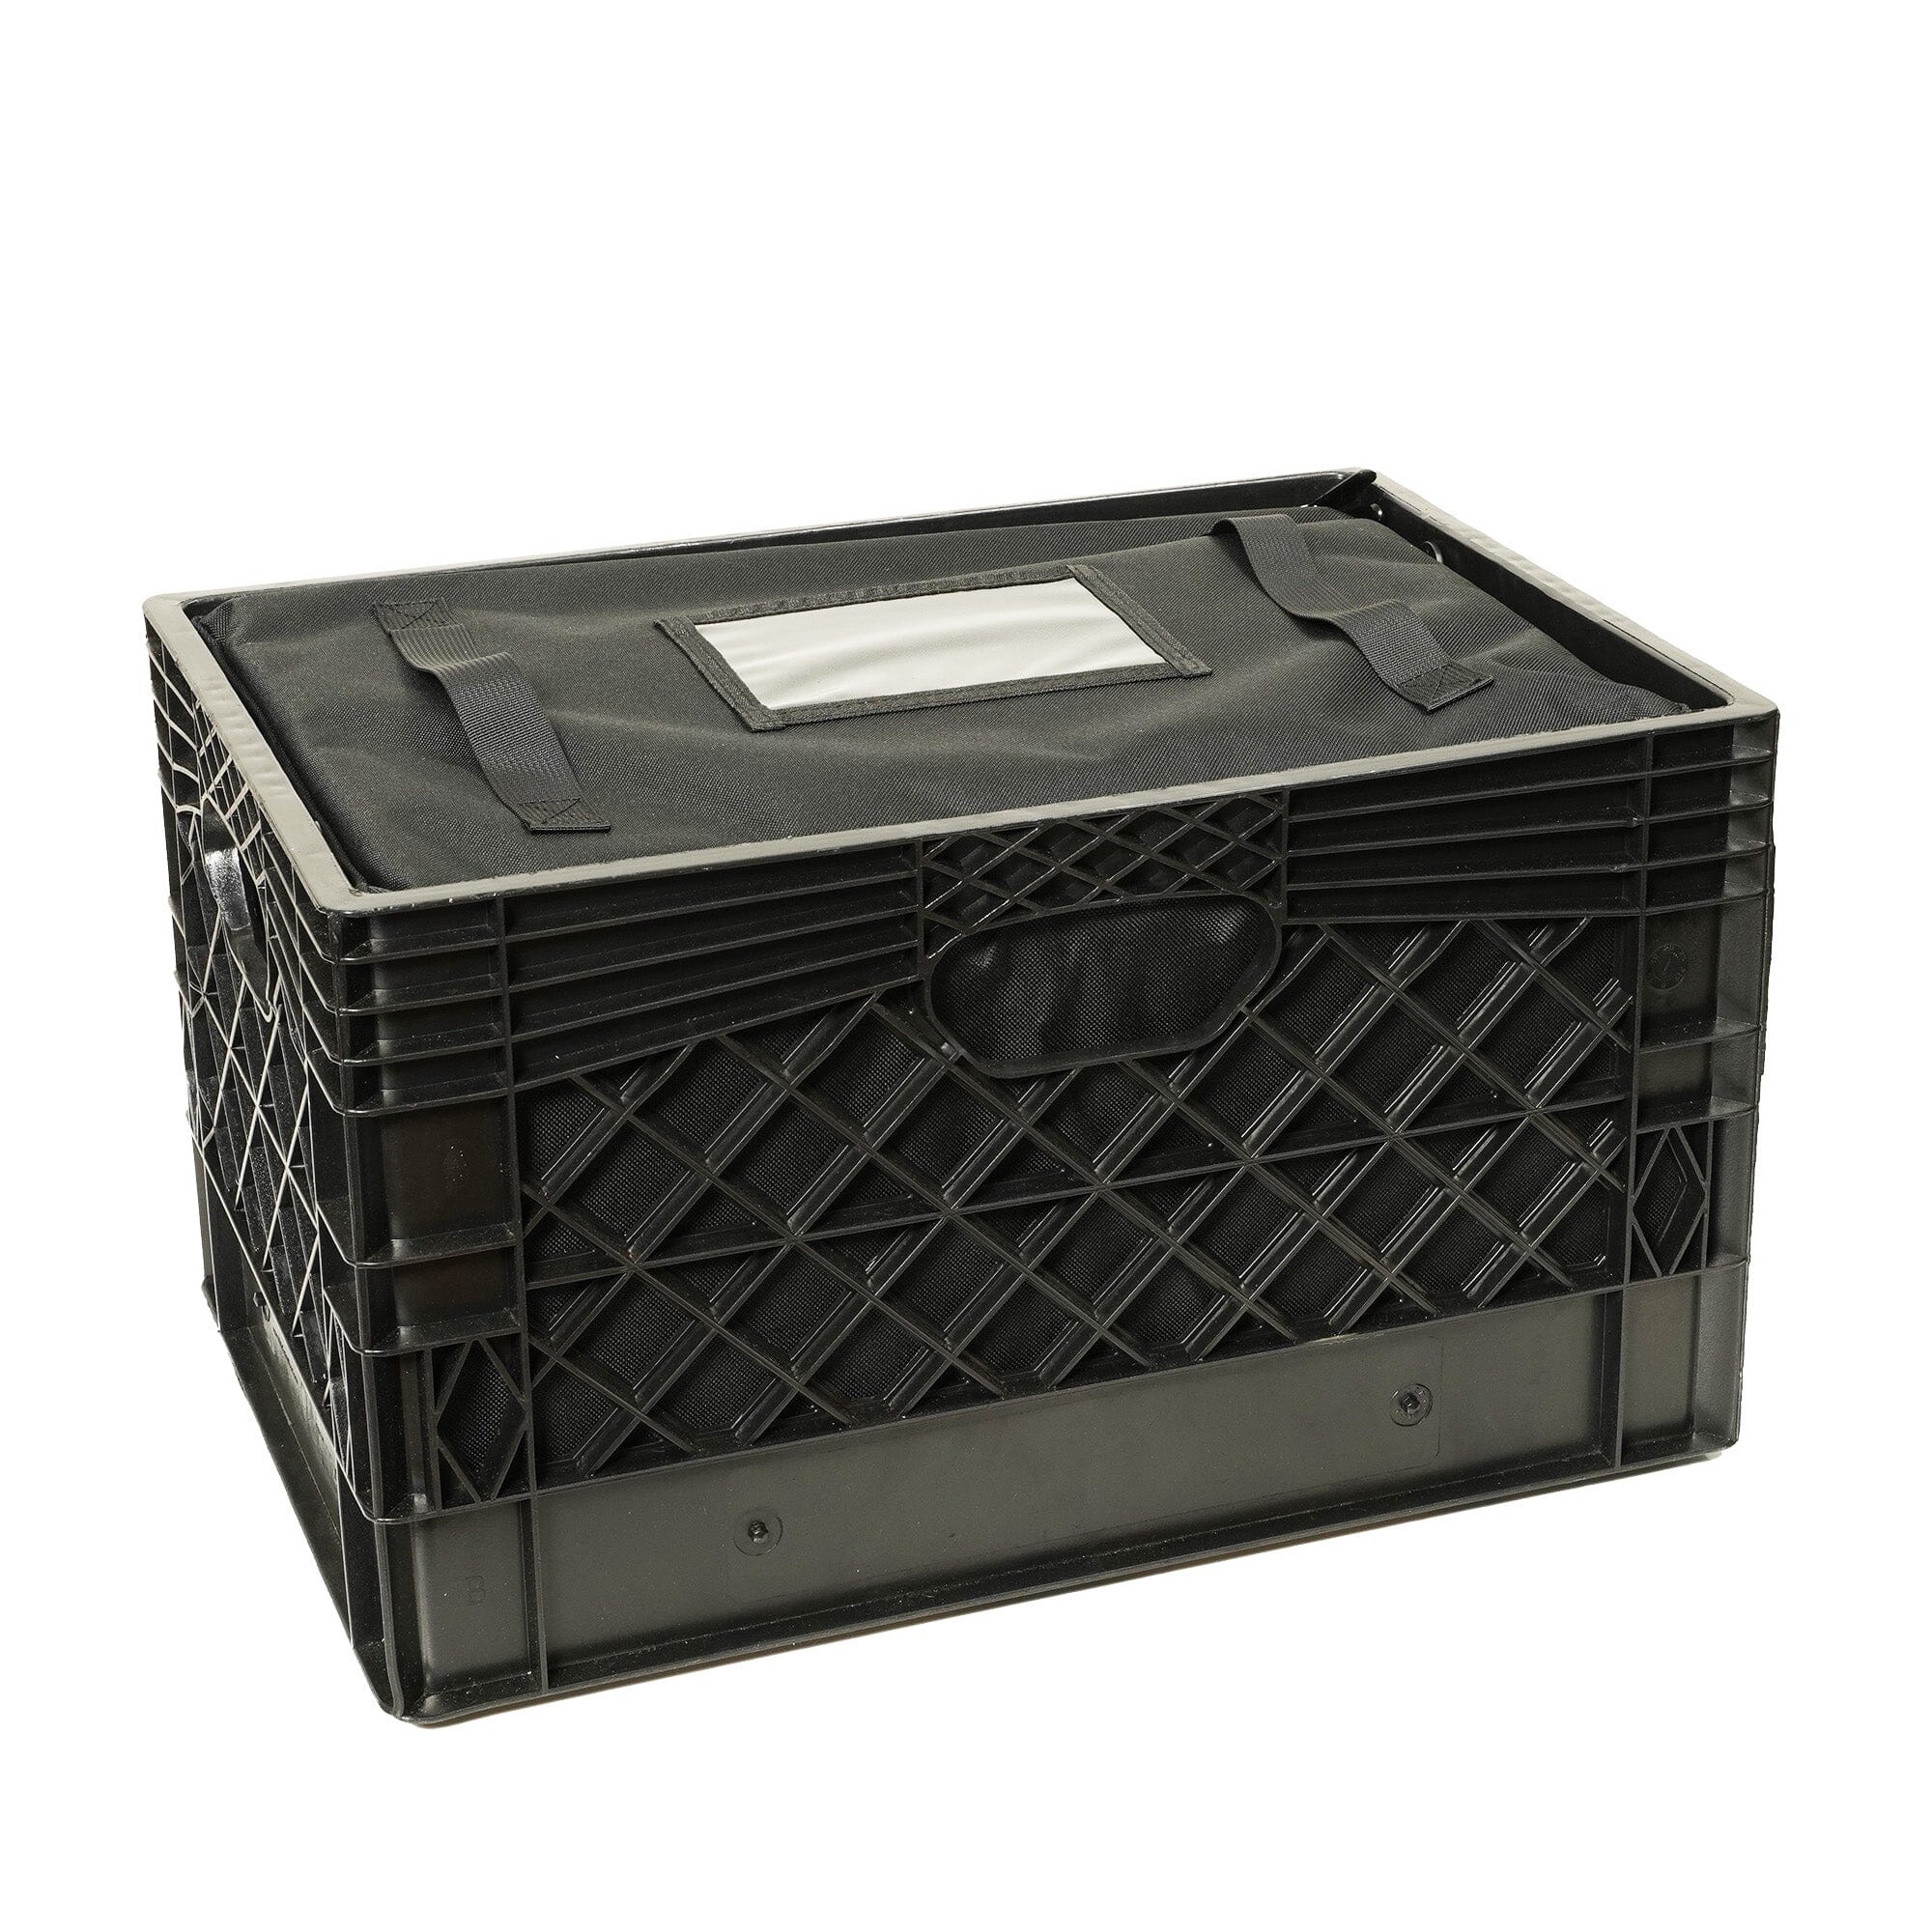 Deluxe Rectangular Milk Crate Insert Storage Case / Zippered Bag (Crate Not Included)